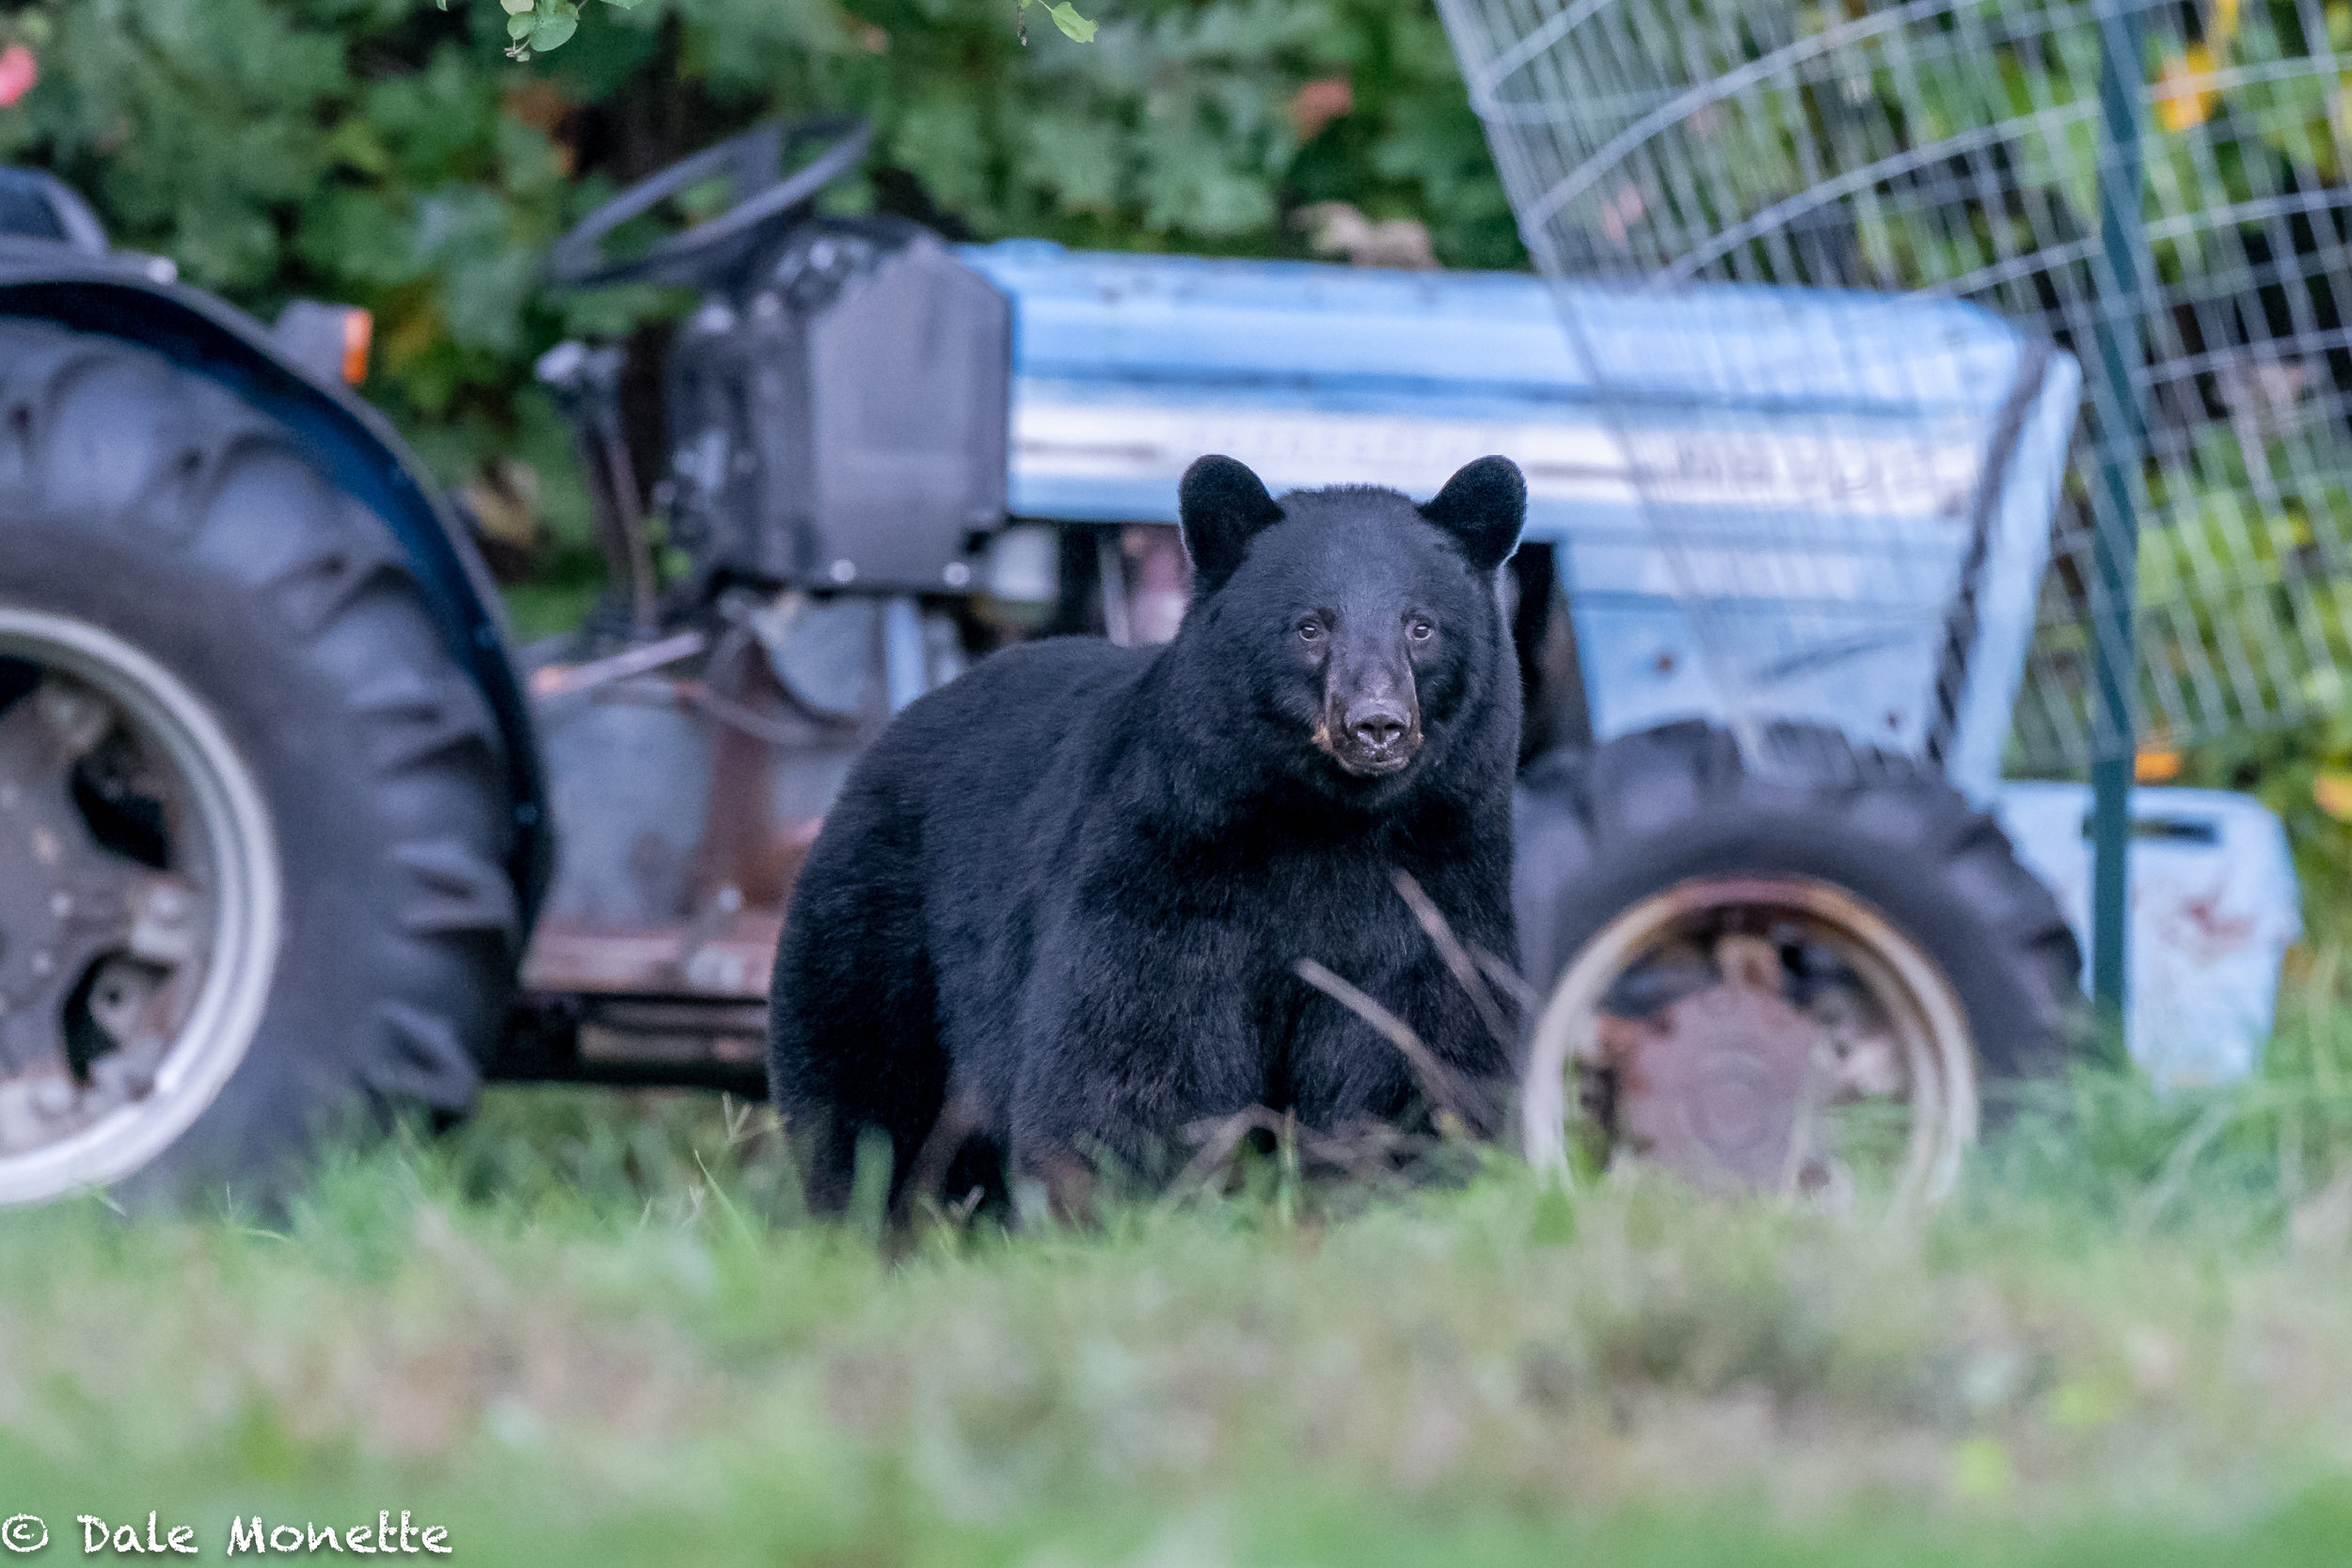   On another evening about dusk I spotted the same sow with her 2 cubs walk out of the woods by this tractor used for mowing. The cubs spent a few minutes walking all over it. I don’t think they had ever seen one.  